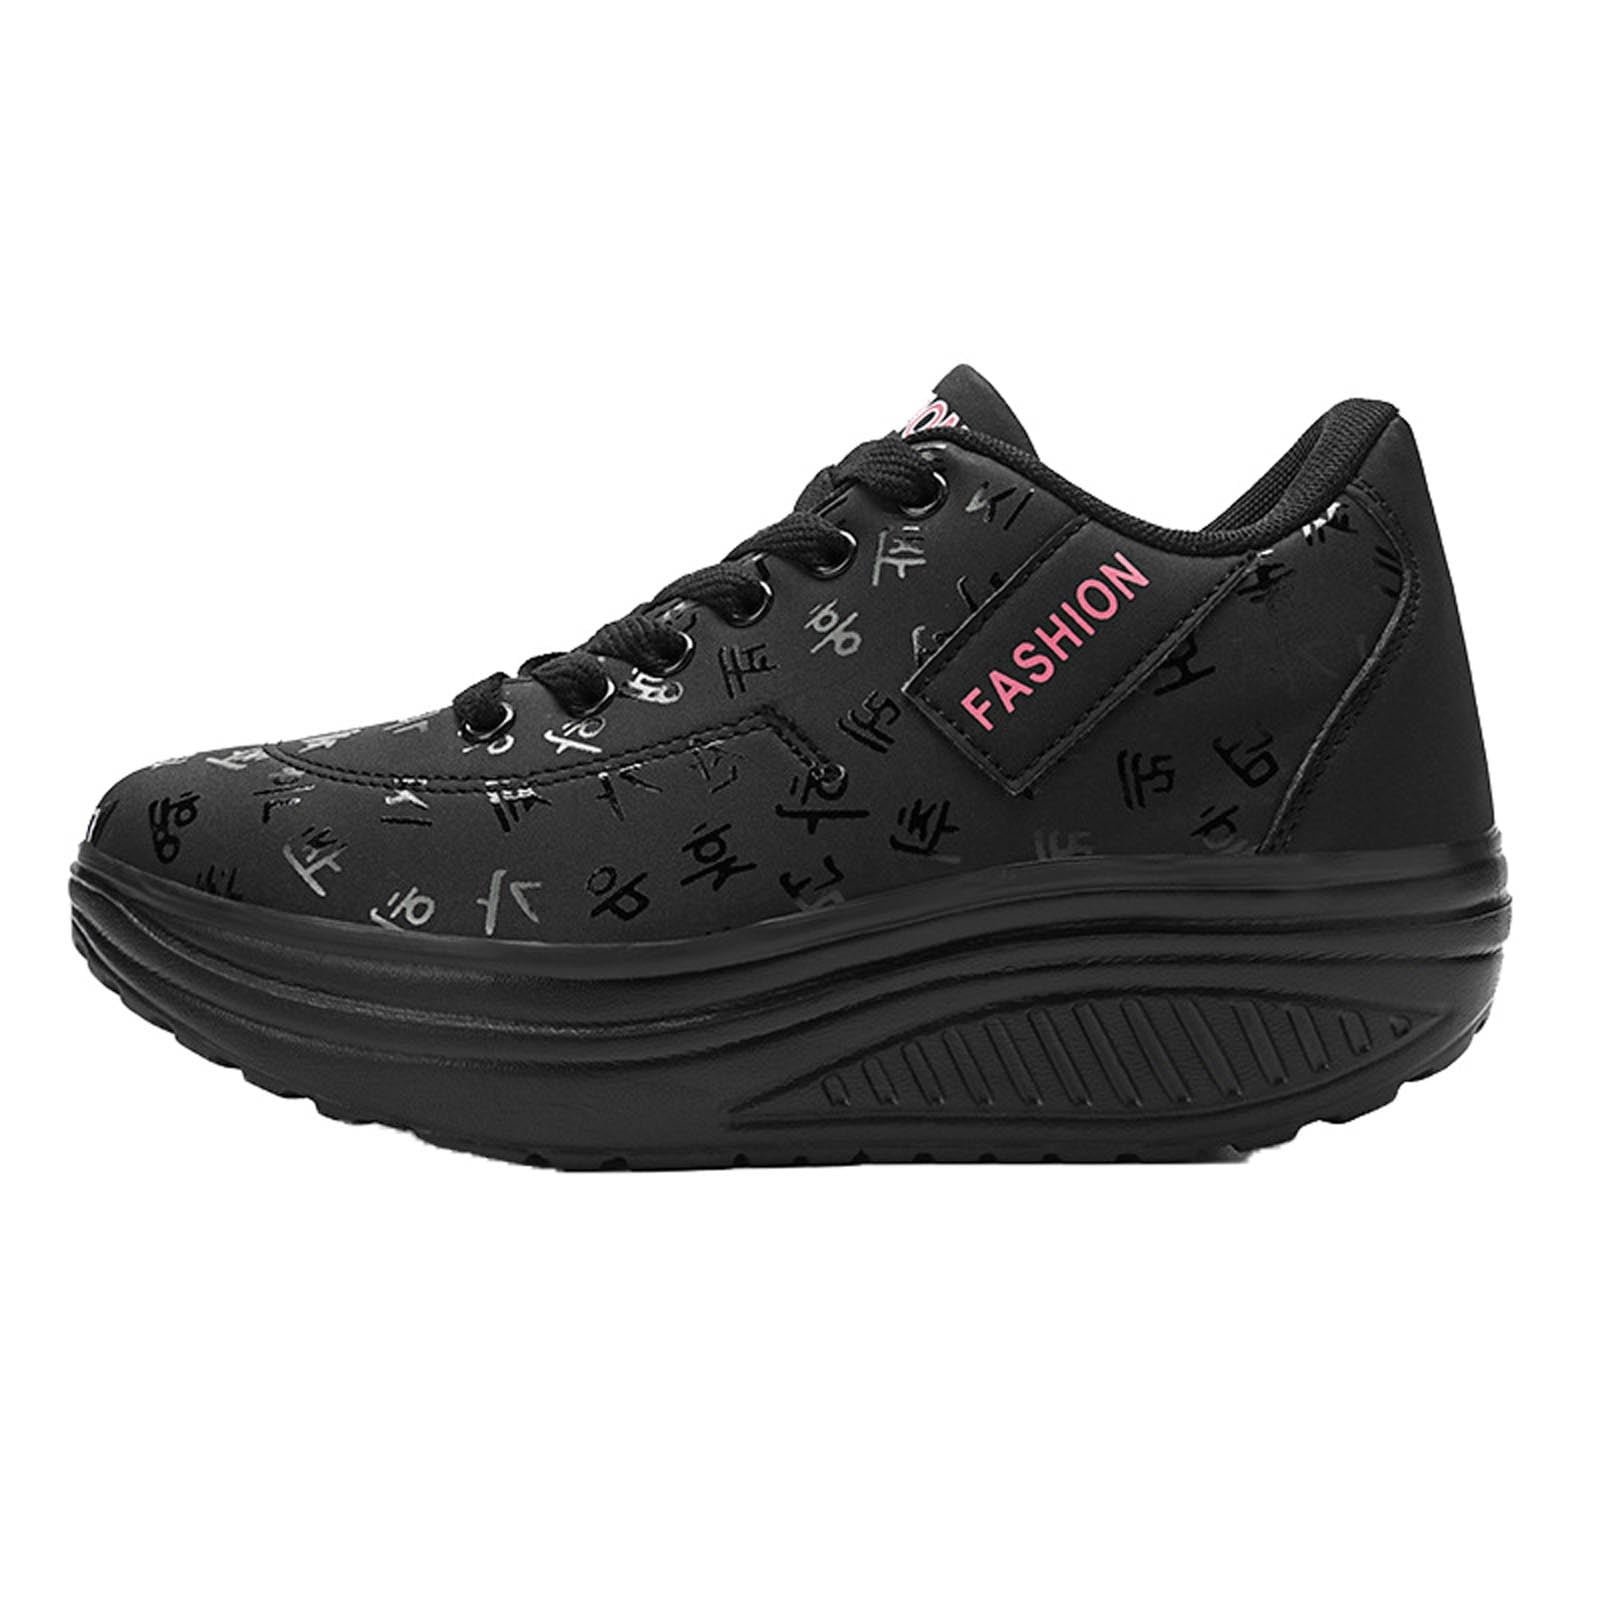 Womens Sneakers Walking Tennis Shoes Fashion Breathable Lace-up ...